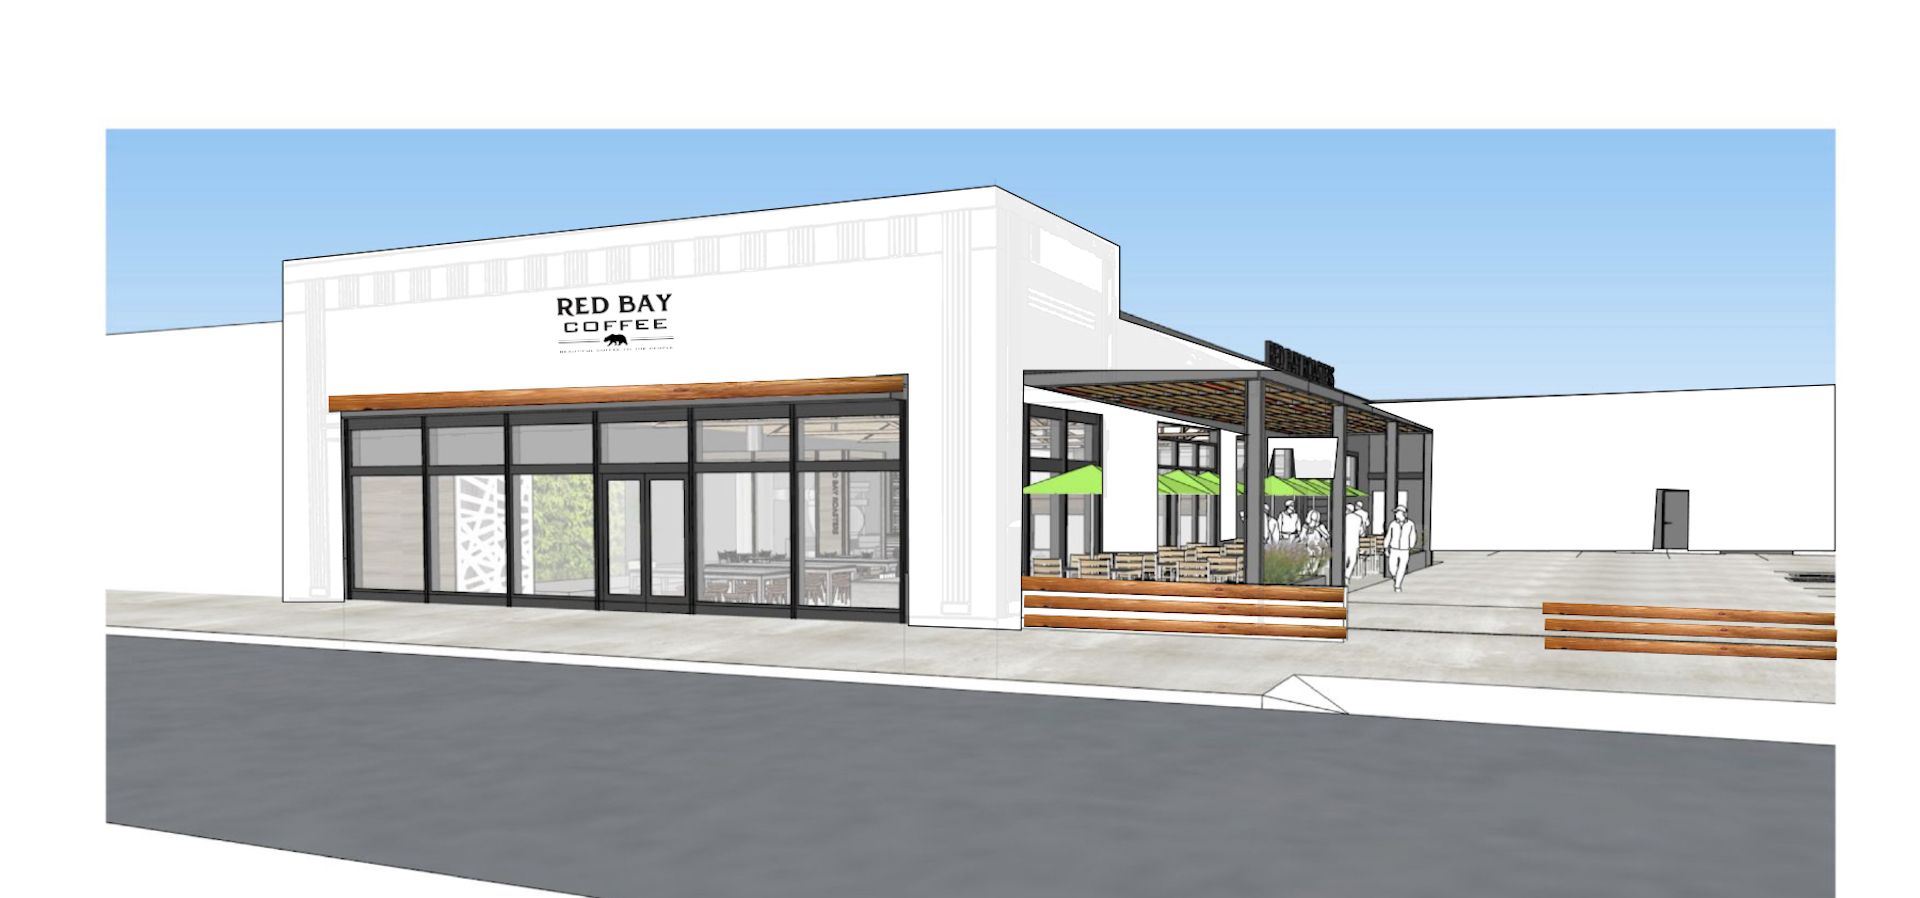 A digital rendering of the Red Bay Coffee space coming this Spring to South L.A.'s Jefferson Park neighborhood